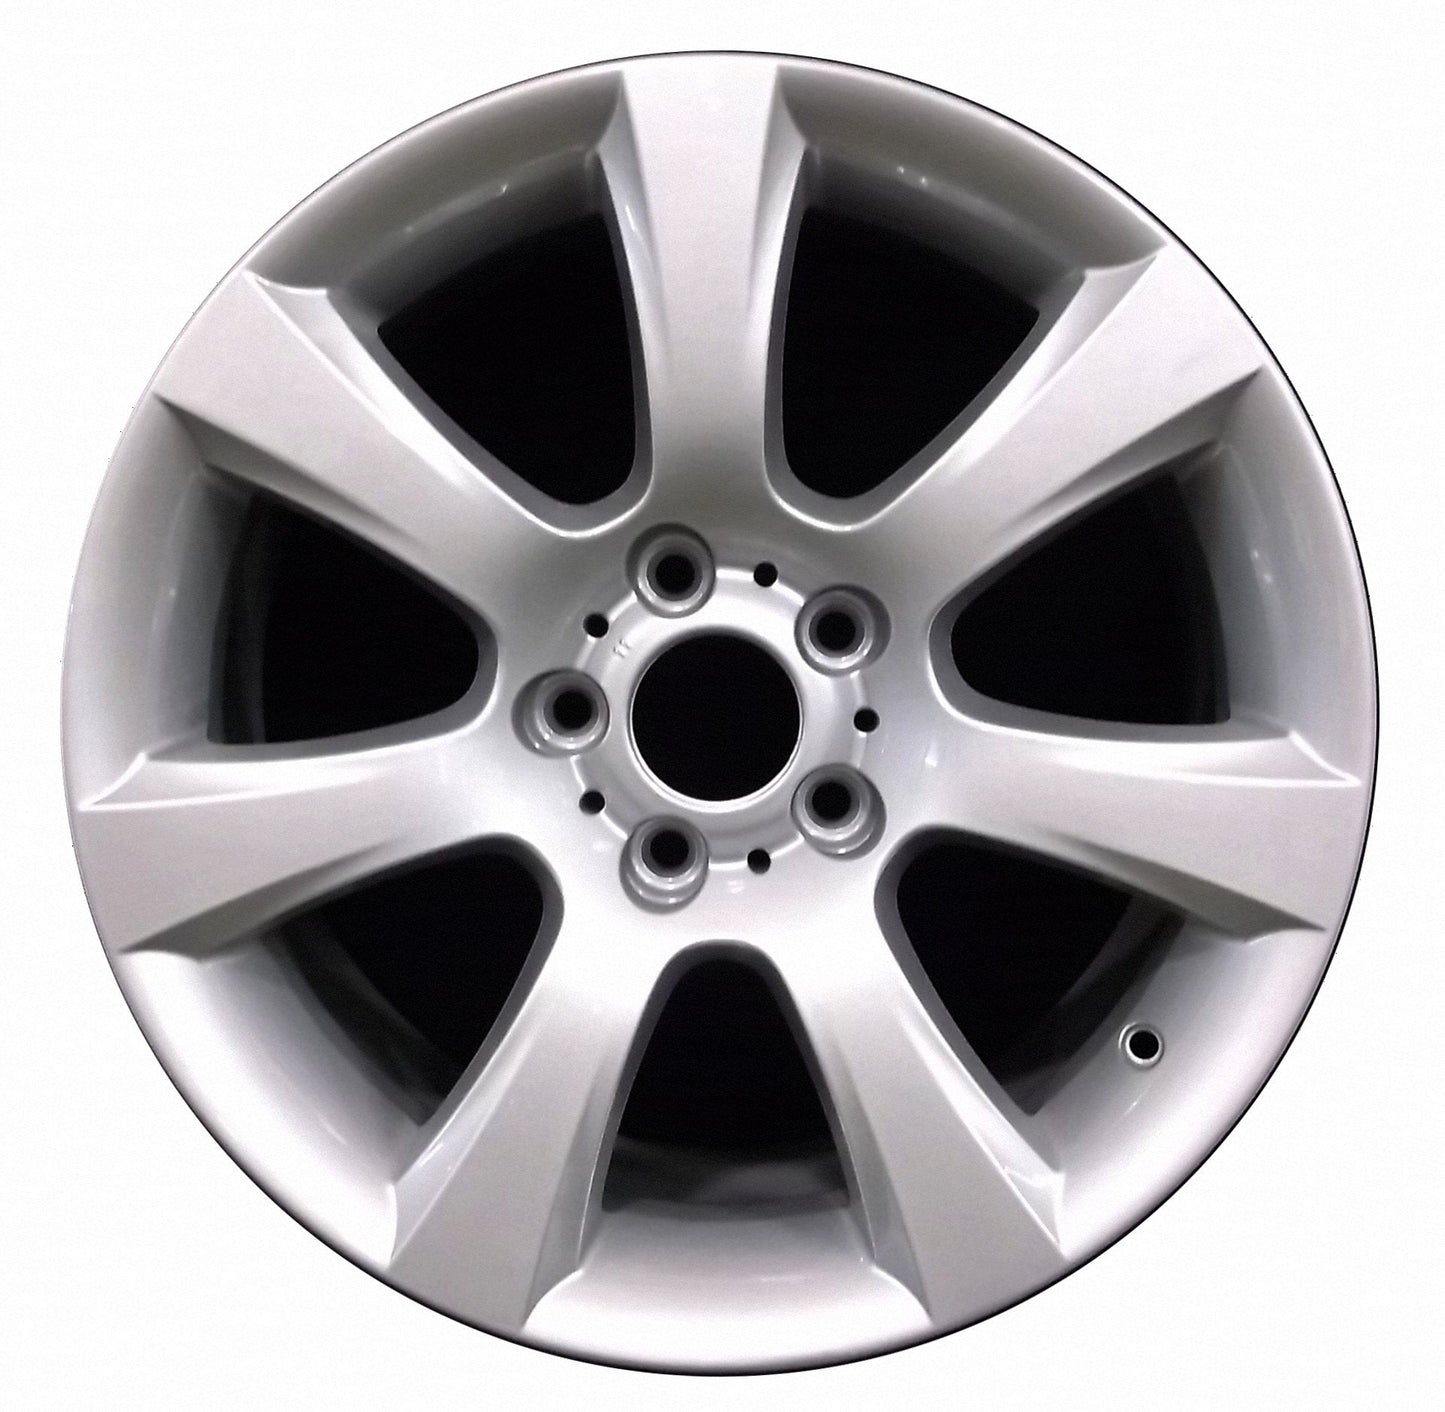 BMW 528i  2011, 2012, 2013, 2014, 2015, 2016 Factory OEM Car Wheel Size 18x8 Alloy WAO.71405FT.PS10.FF